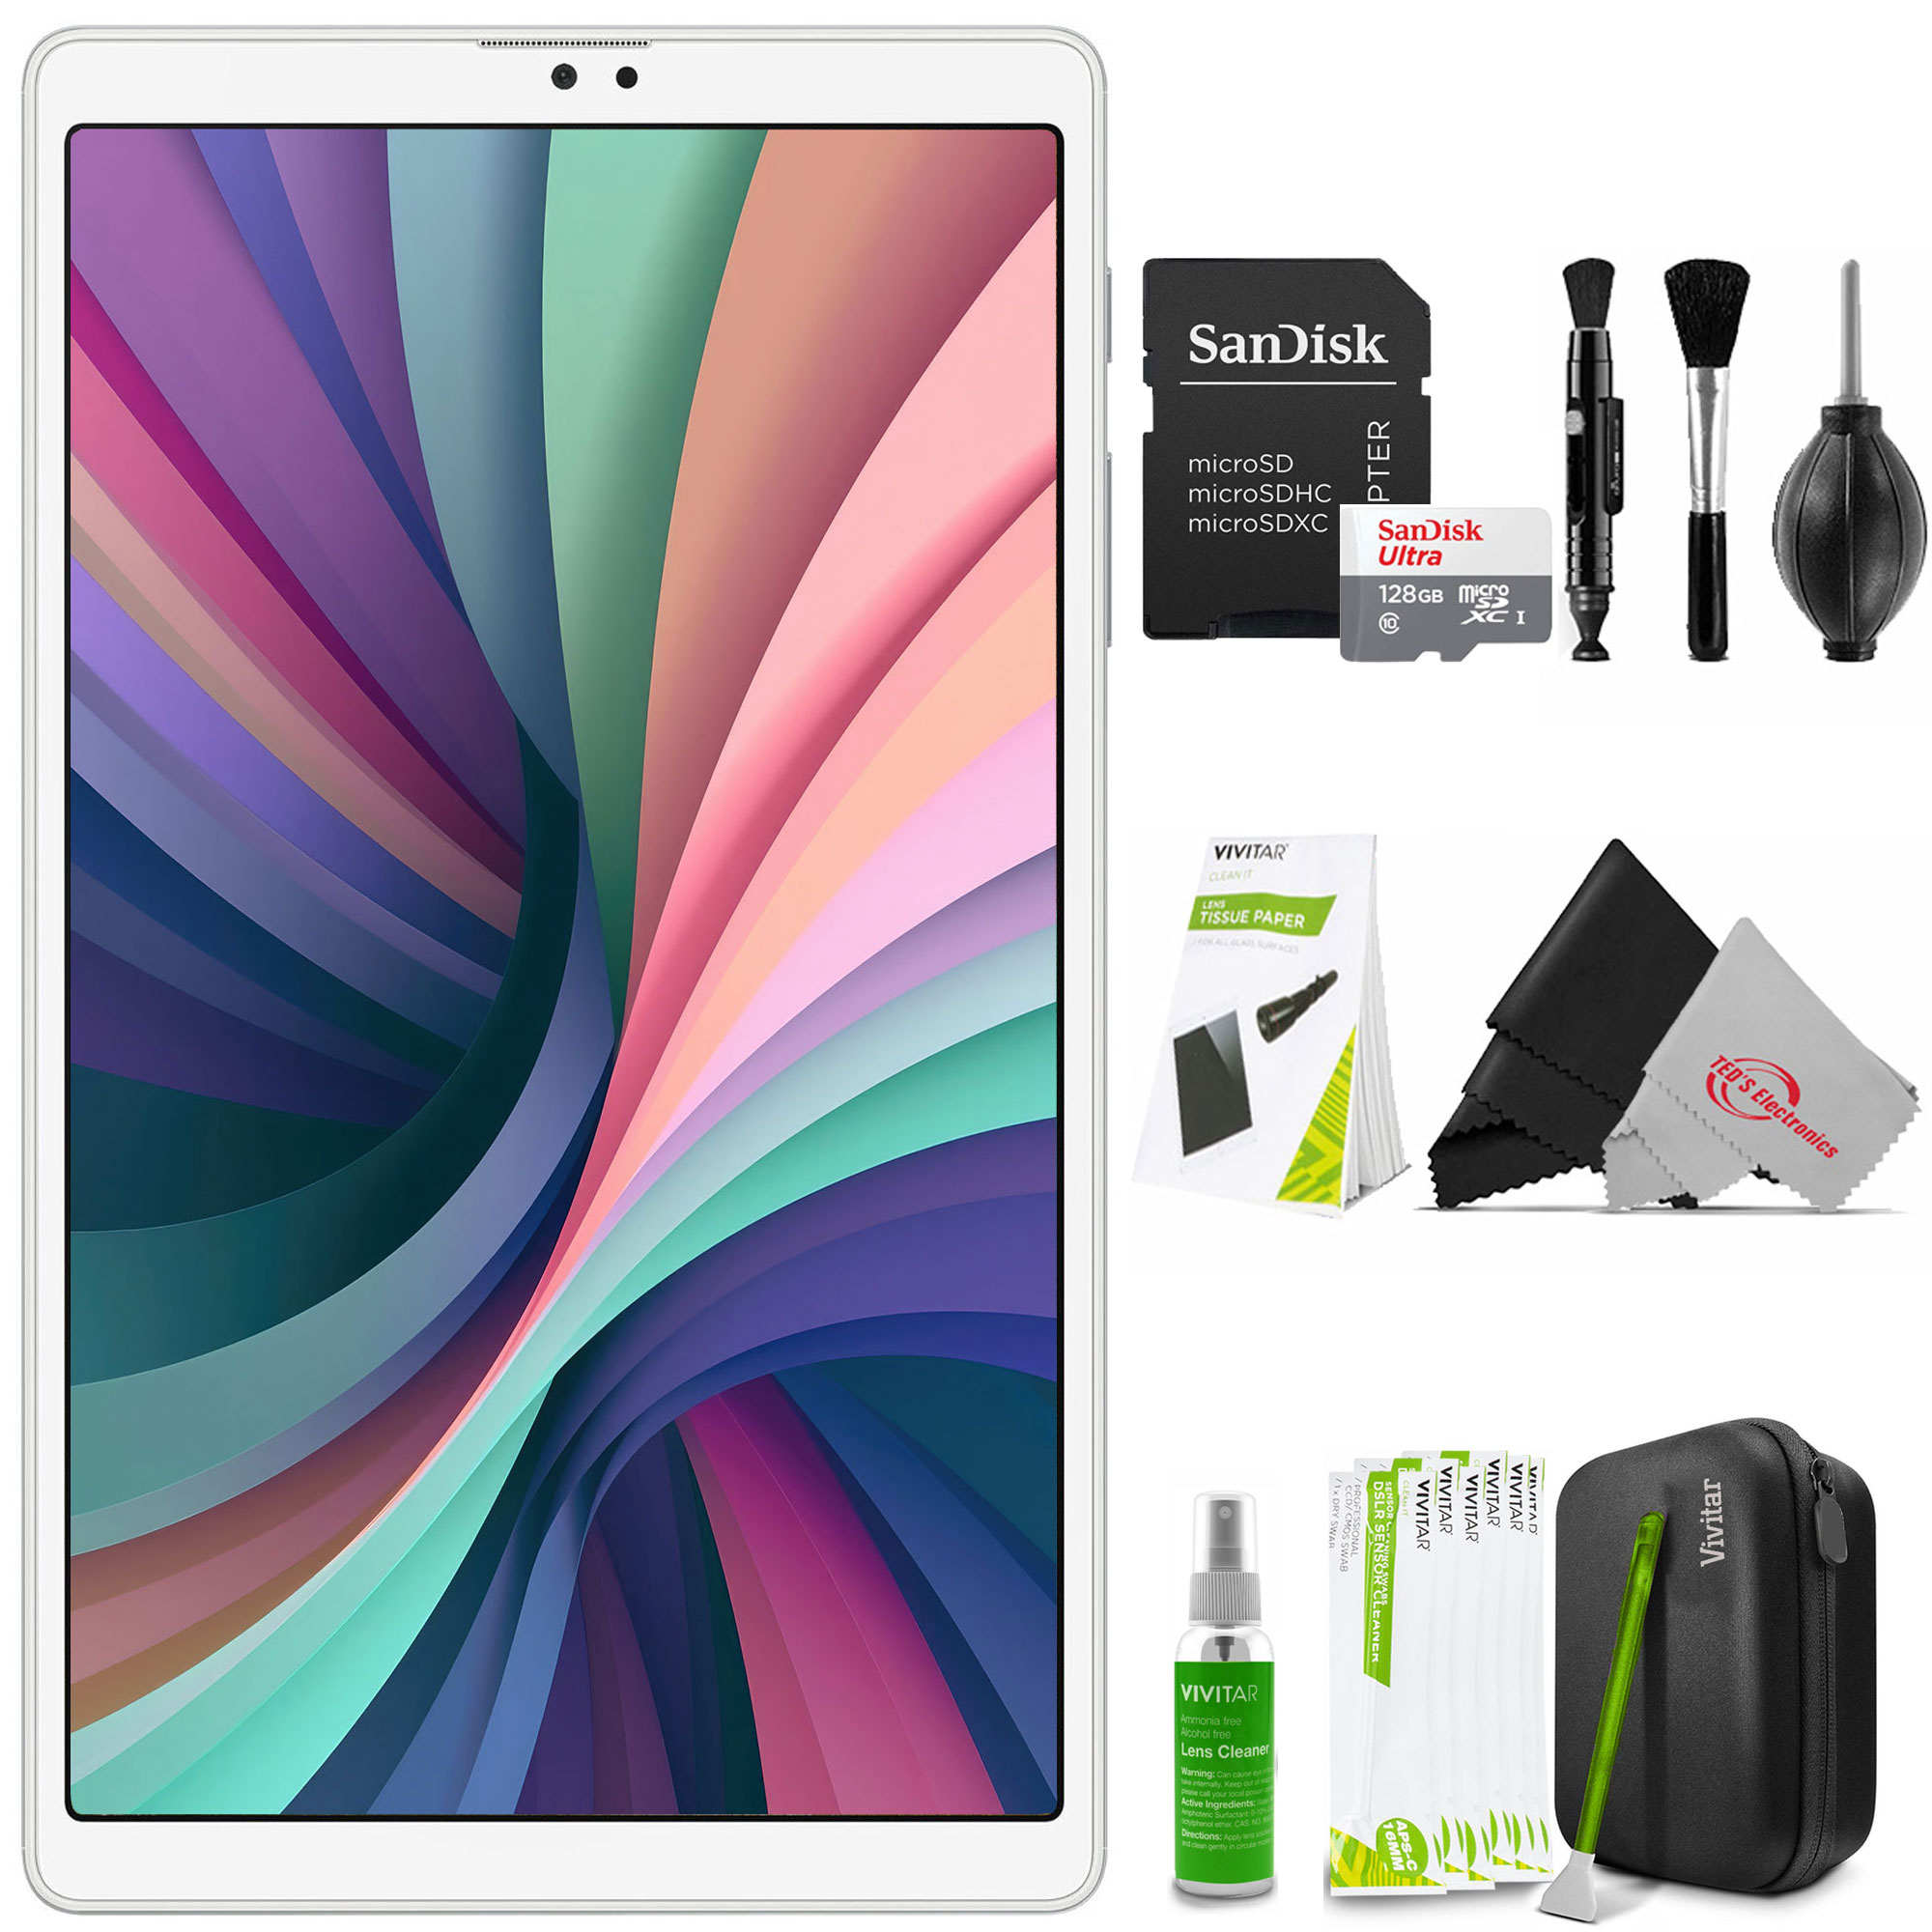 Samsung 8.7" Galaxy Tab A7 Lite 32GB Tablet (Silver) with 128GB microSDHC Memory Card and Cleaning Kit